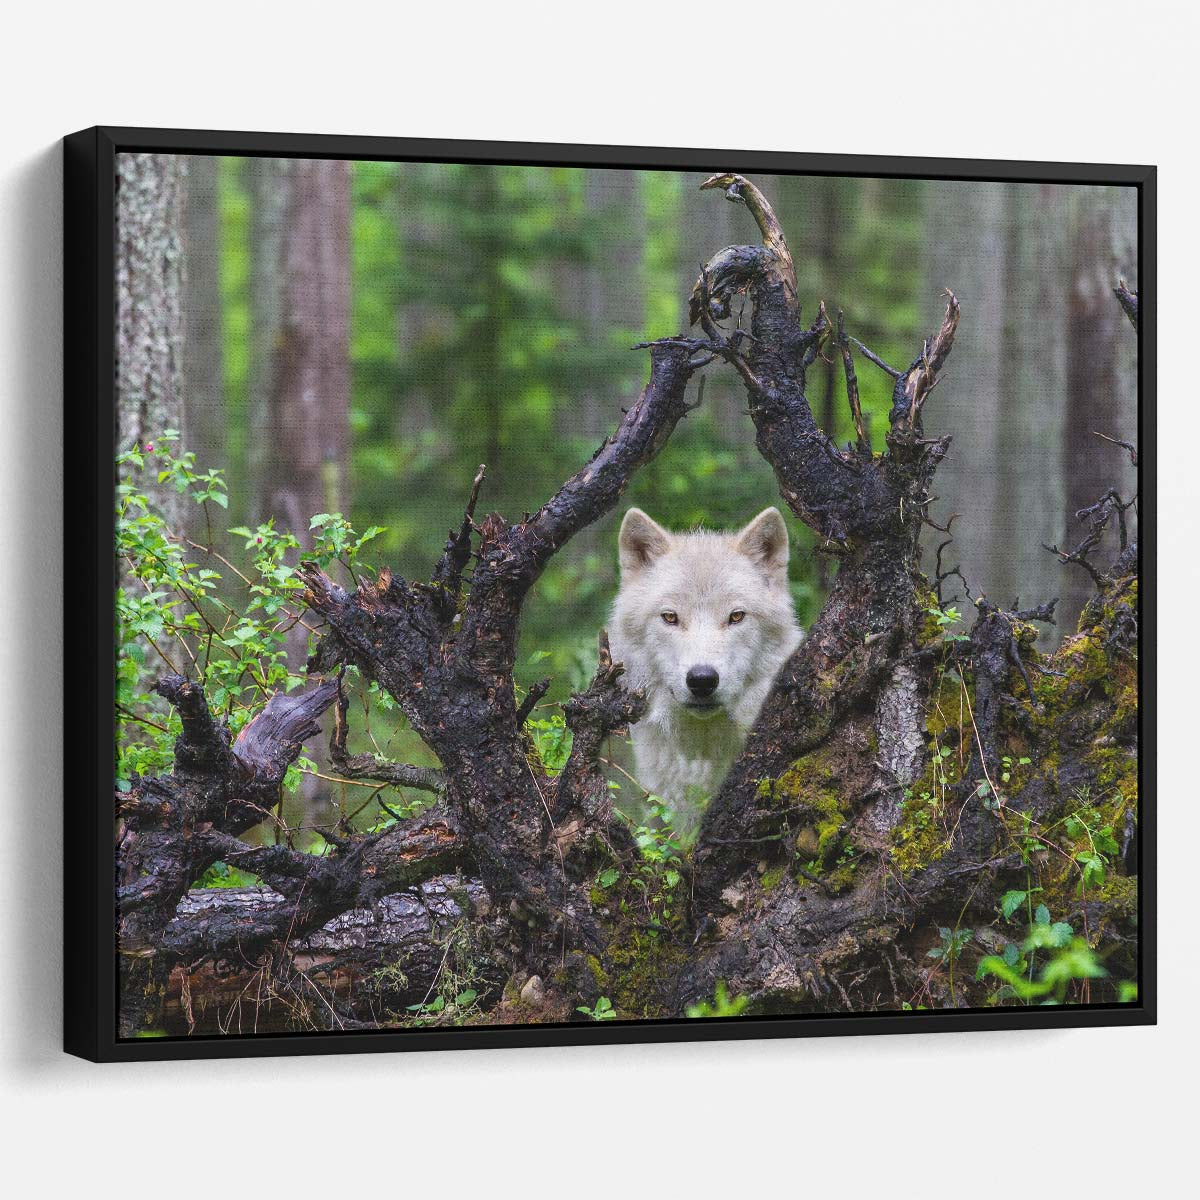 Enigmatic White Wolf in Forest Landscape Wall Art by Luxuriance Designs. Made in USA.